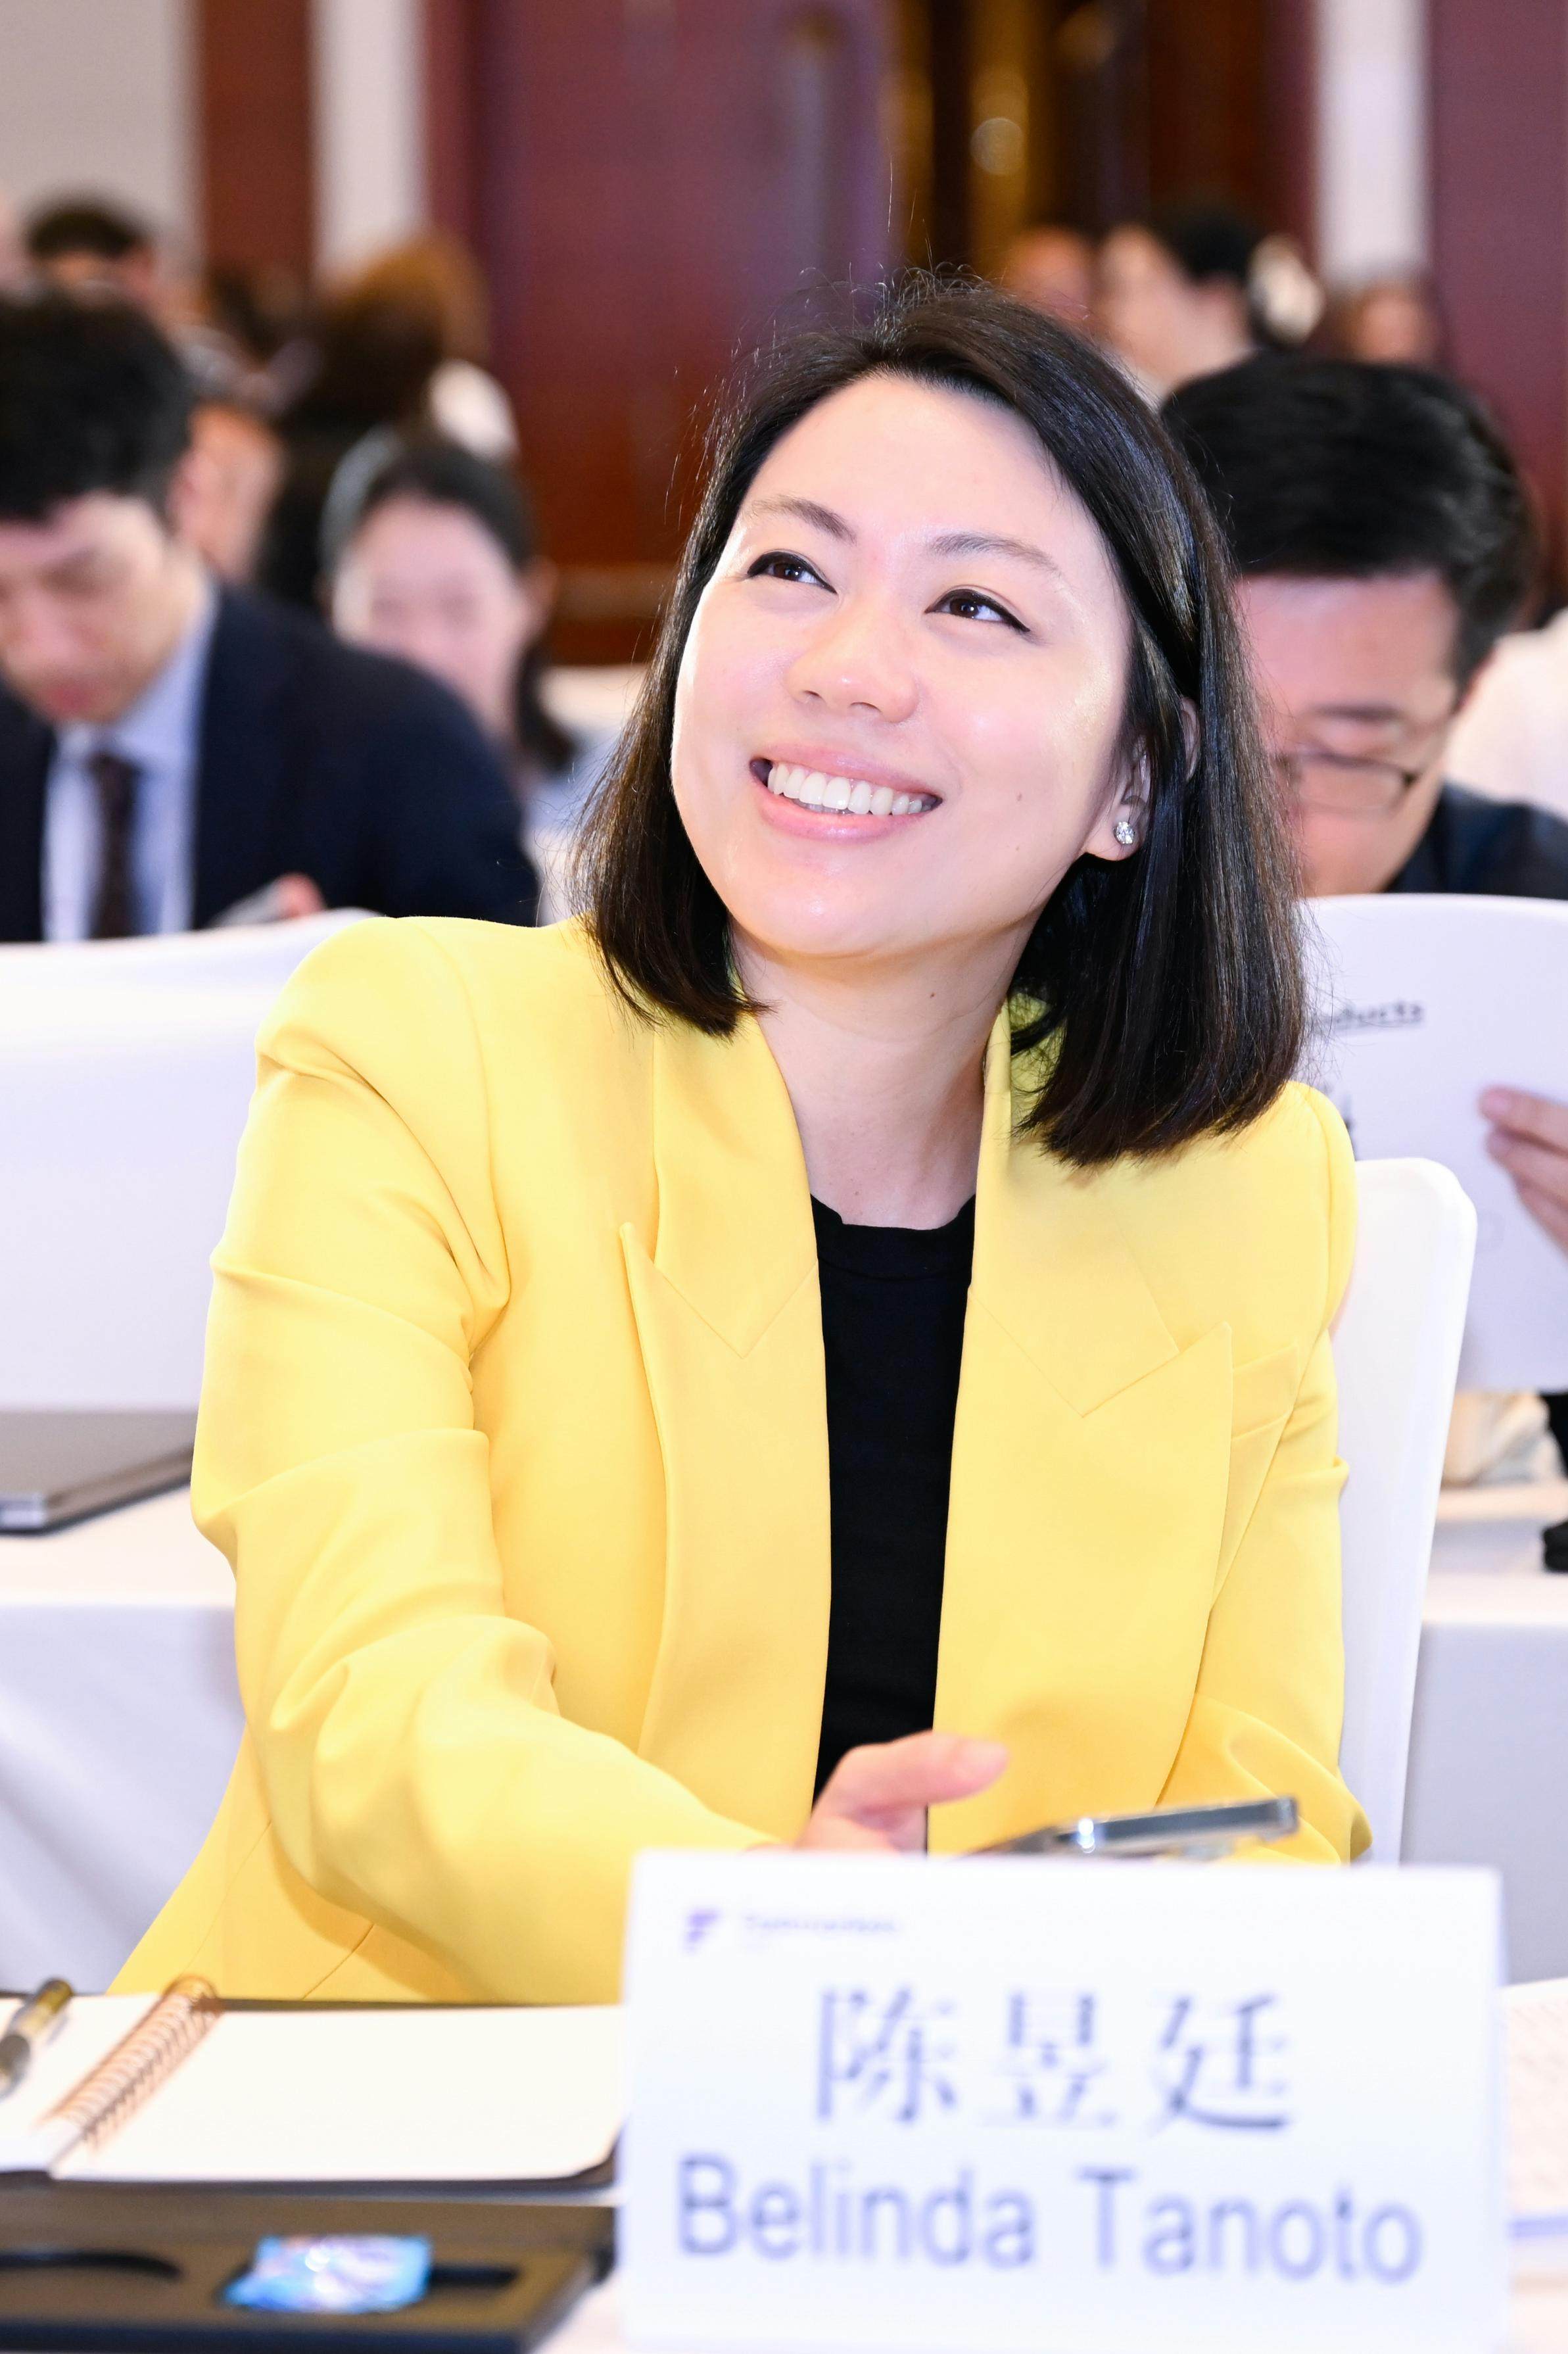 Belinda Tanoto chairs the China division of her family’s sprawling business empire, the Singapore-headquartered Royal Golden Eagle (RGE) group. Photo: Handout